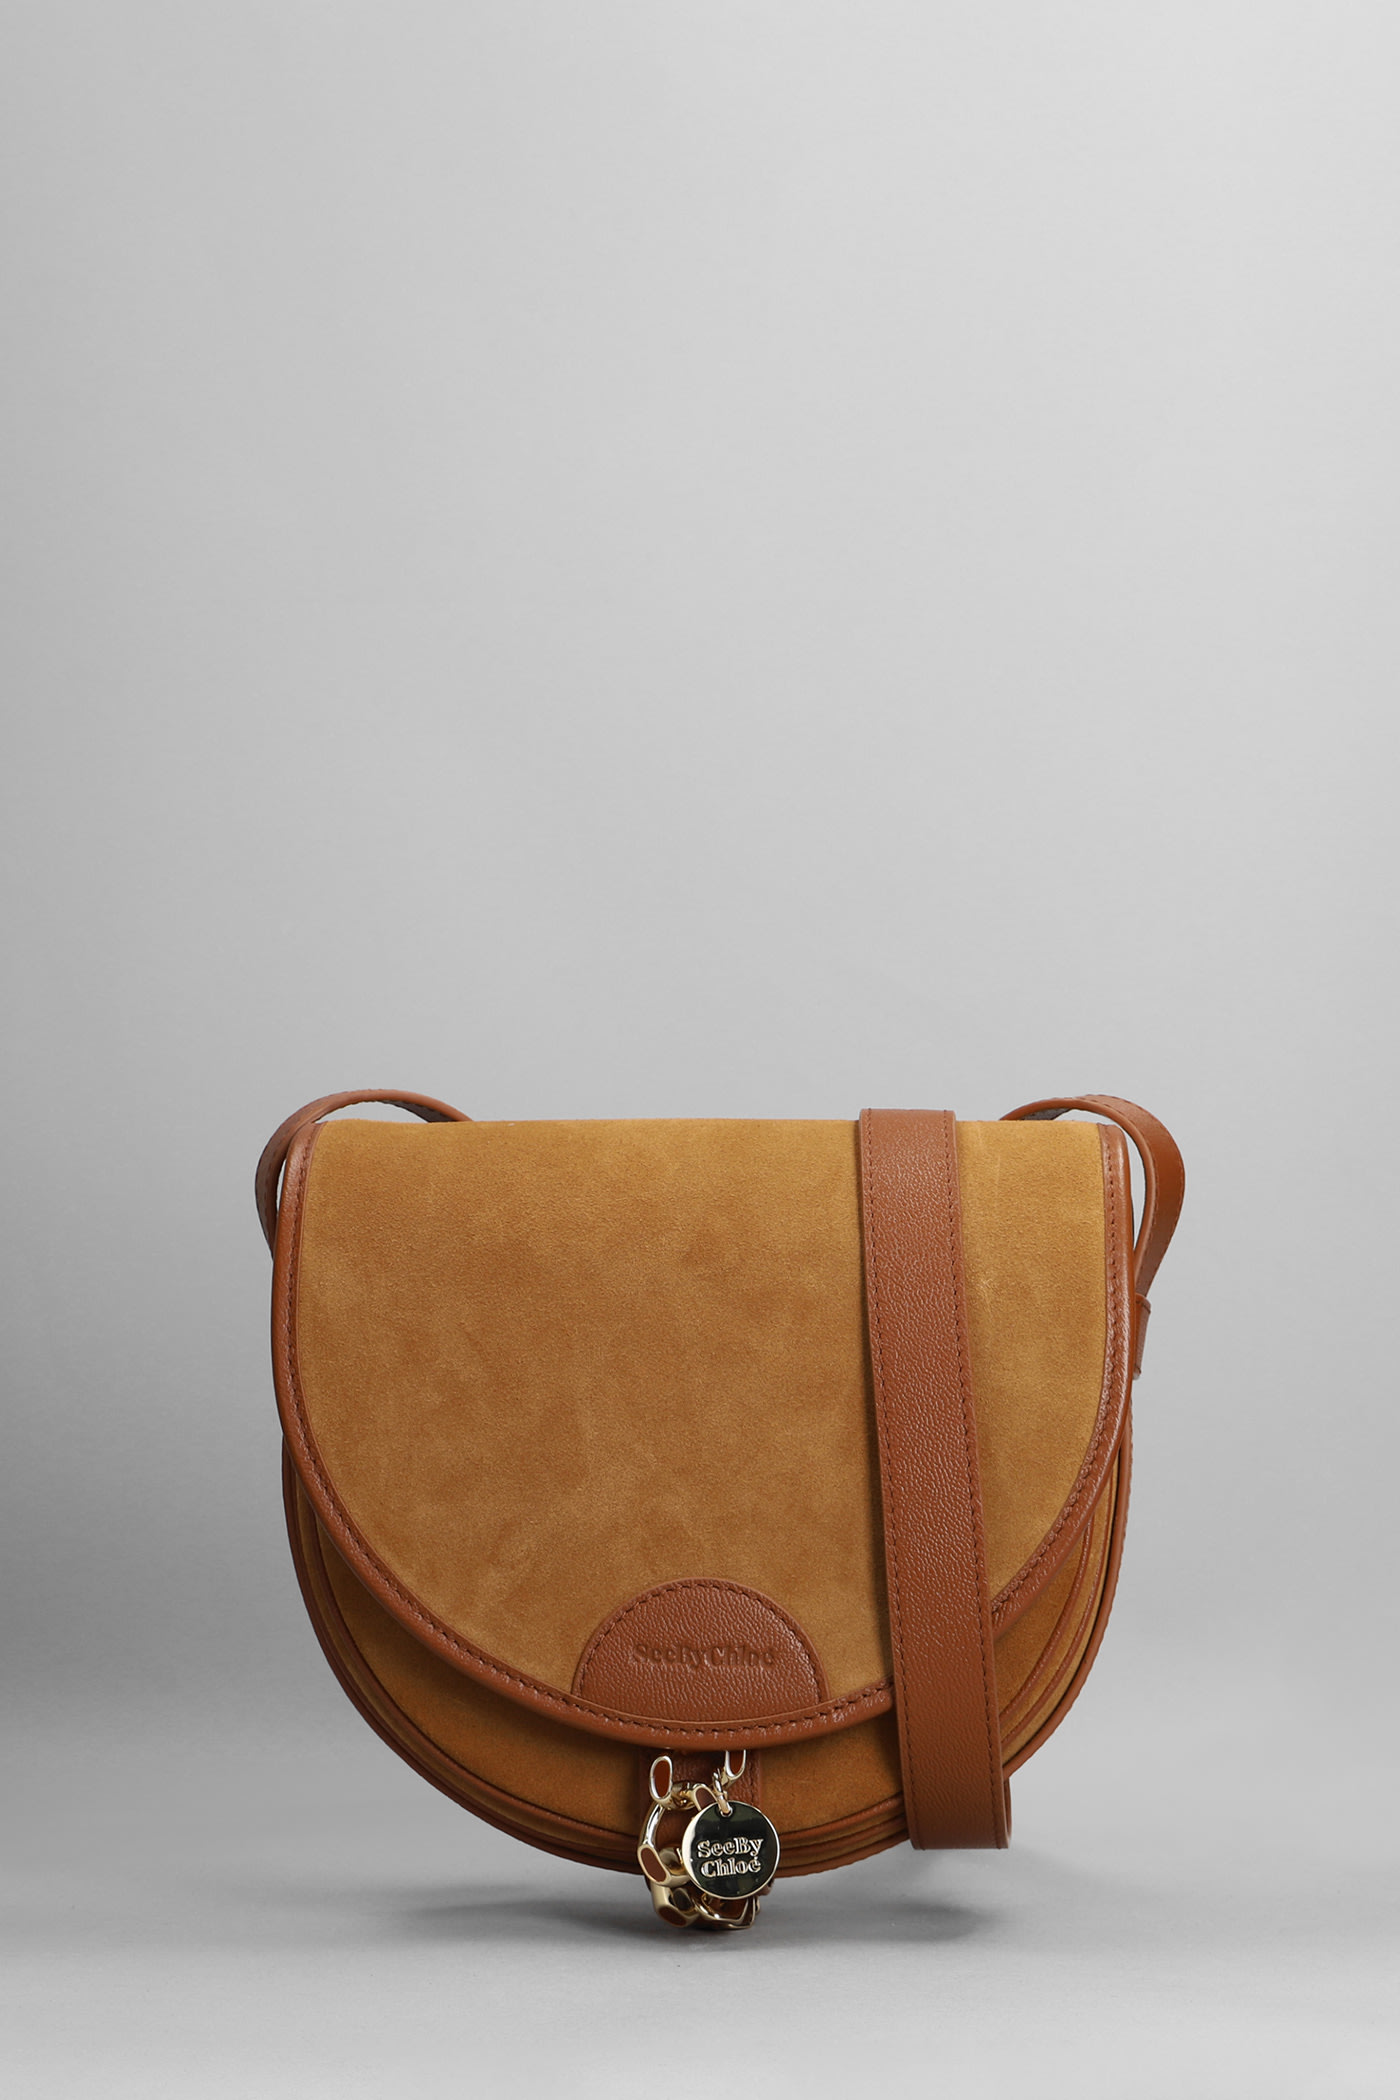 SEE BY CHLOÉ MARA SHOULDER BAG IN LEATHER COLOR SUEDE AND LEATHER